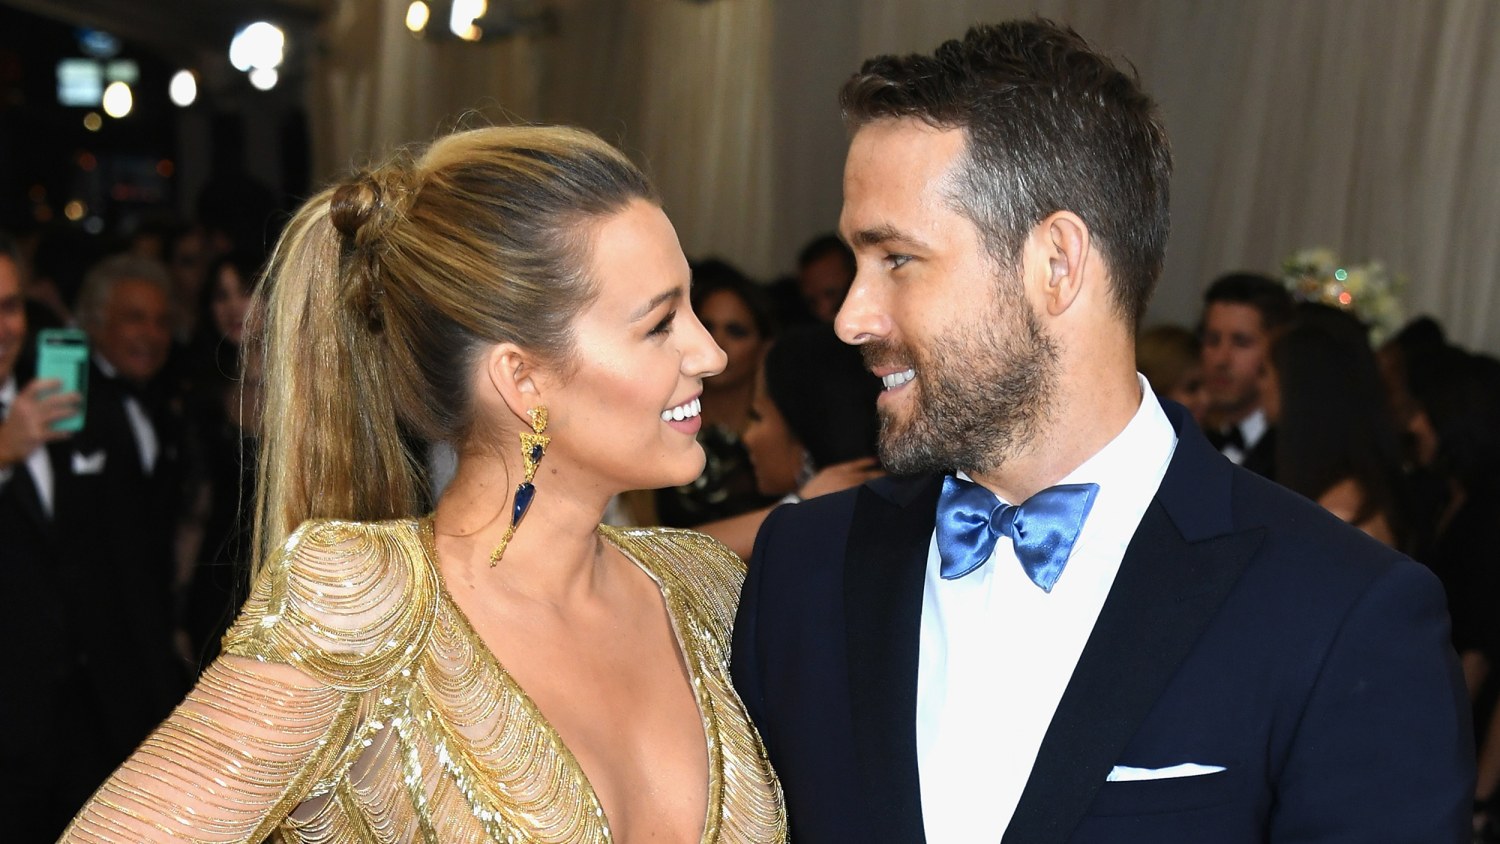 Ryan Reynolds' sweet message gives wife Blake Lively more than 2 million  likes for her birthday – Finger Lakes Daily News